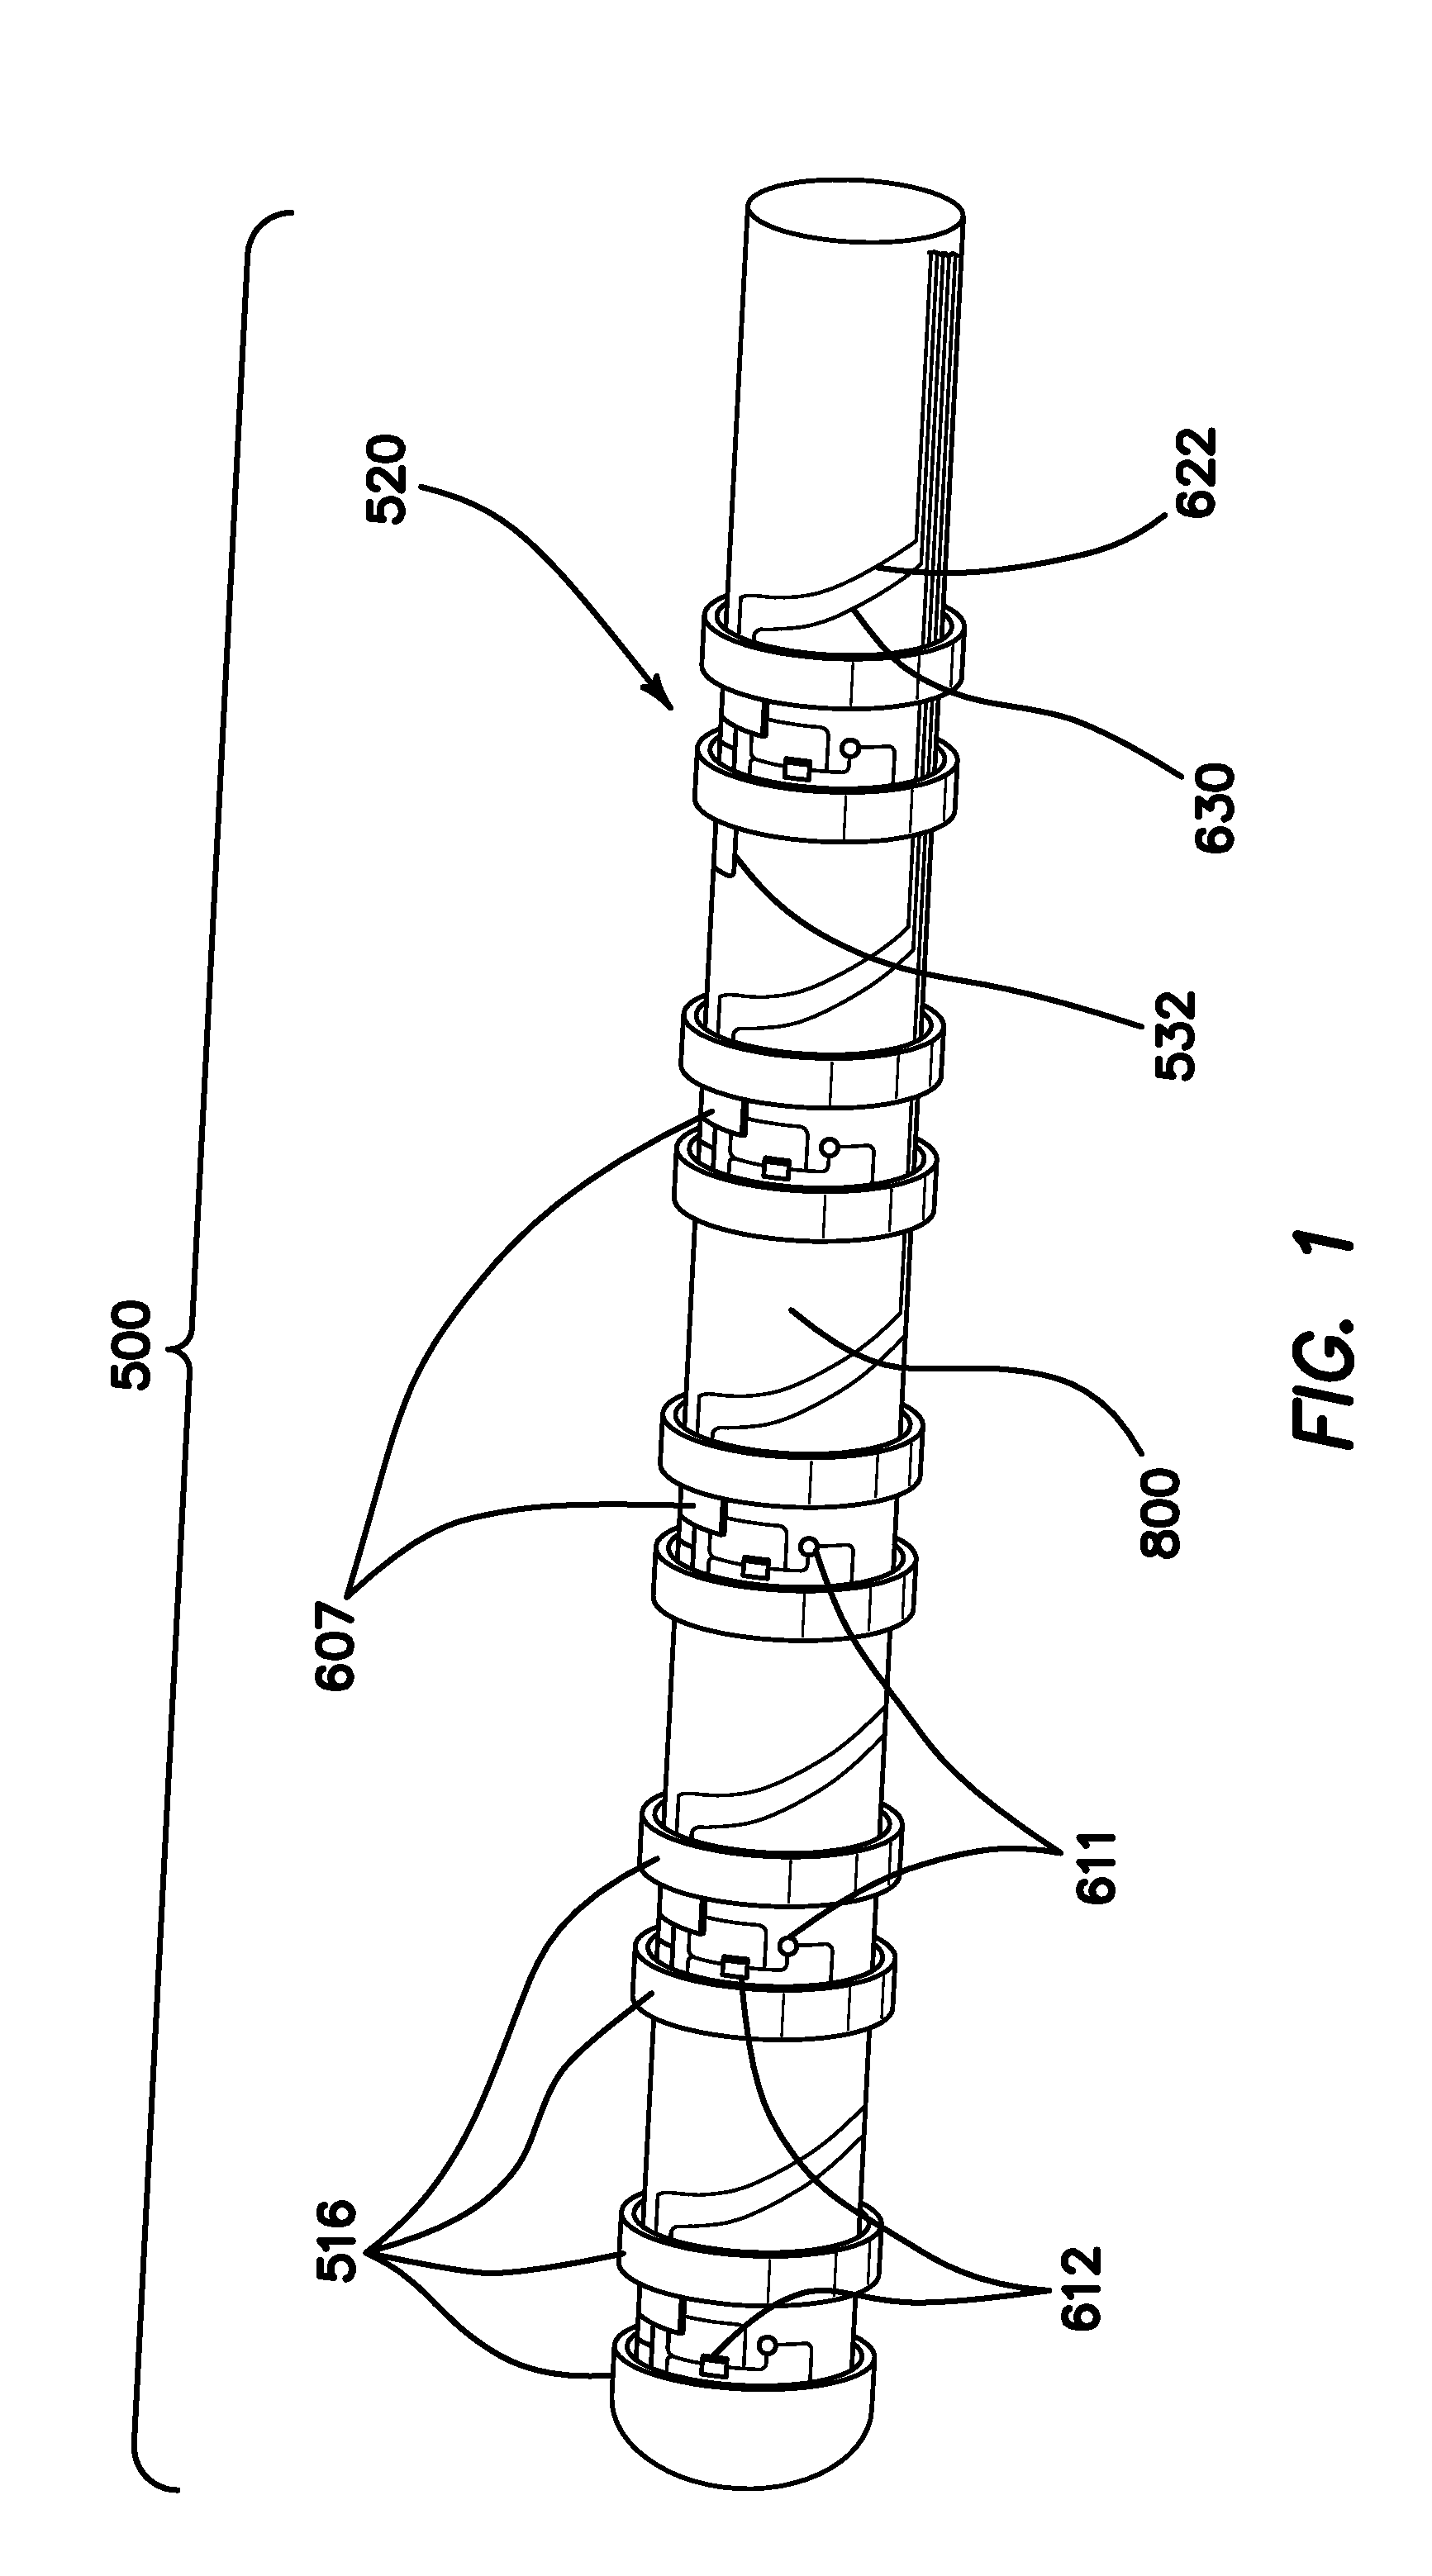 Method and apparatus for measuring biopotential and mapping ephaptic coupling employing a catheter with mosfet sensor array